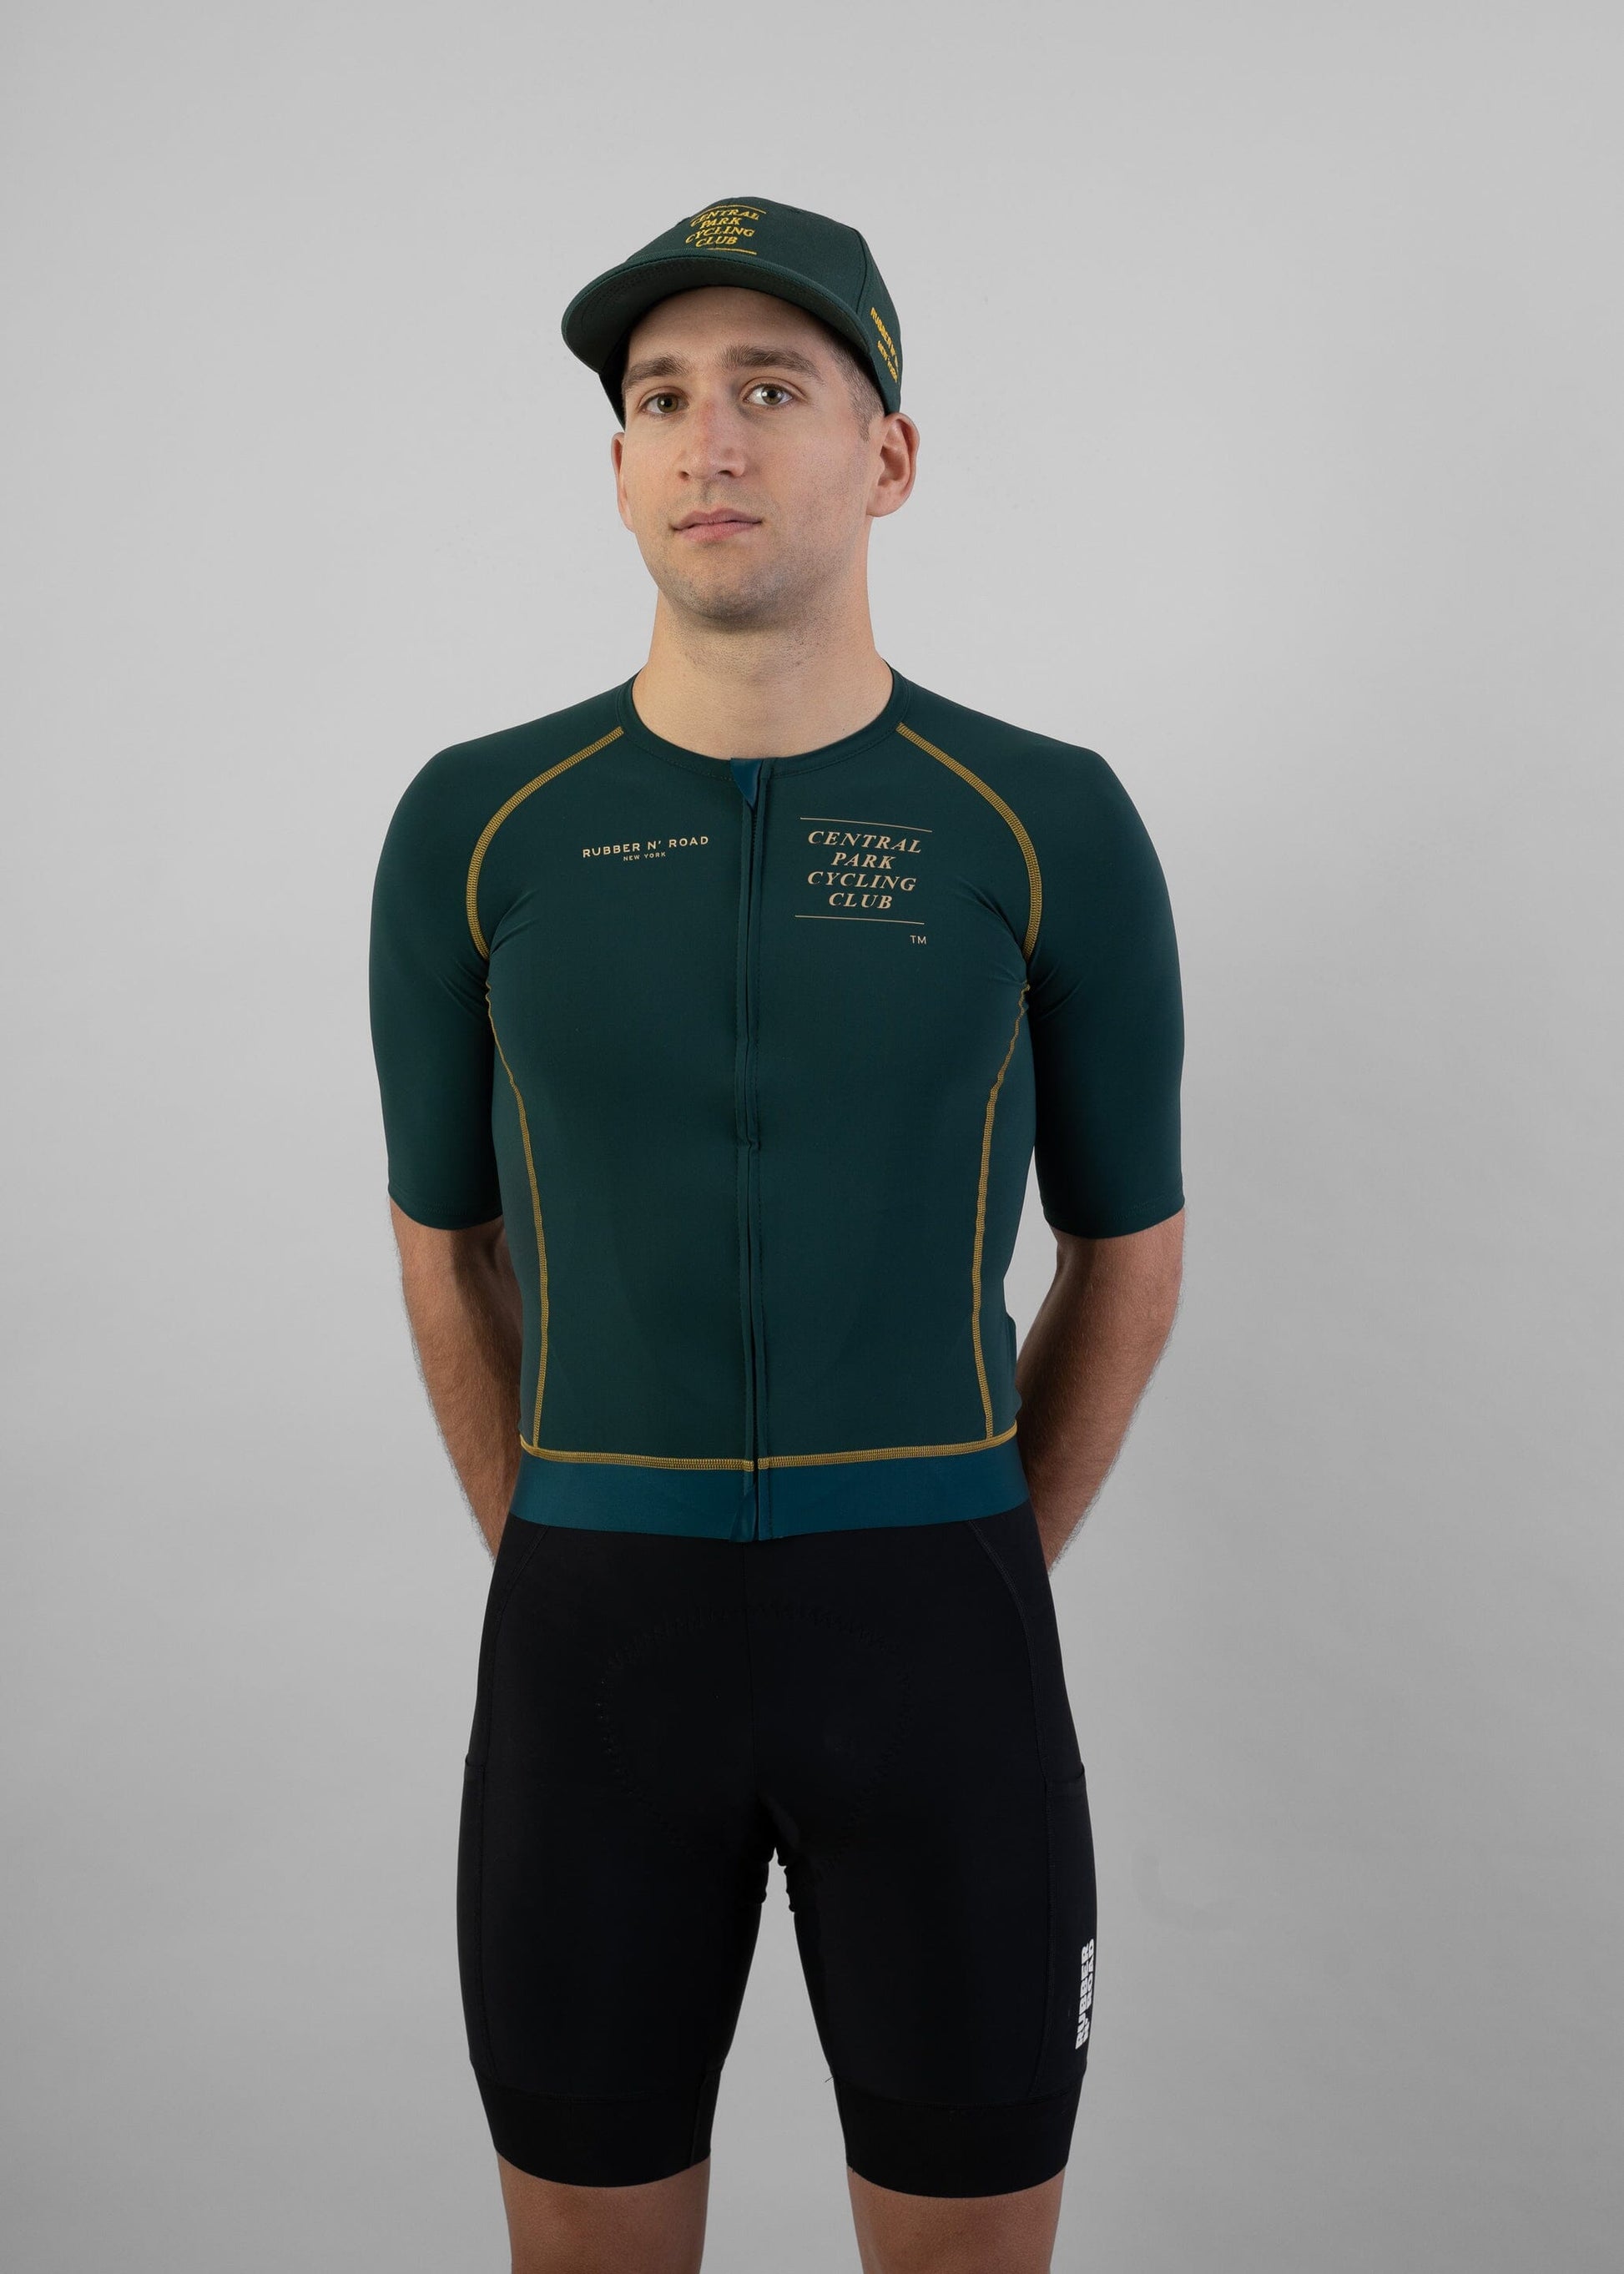 Rubber N' Road - Maillot Central Park Cycling Club Maillots Rubber N' Road 